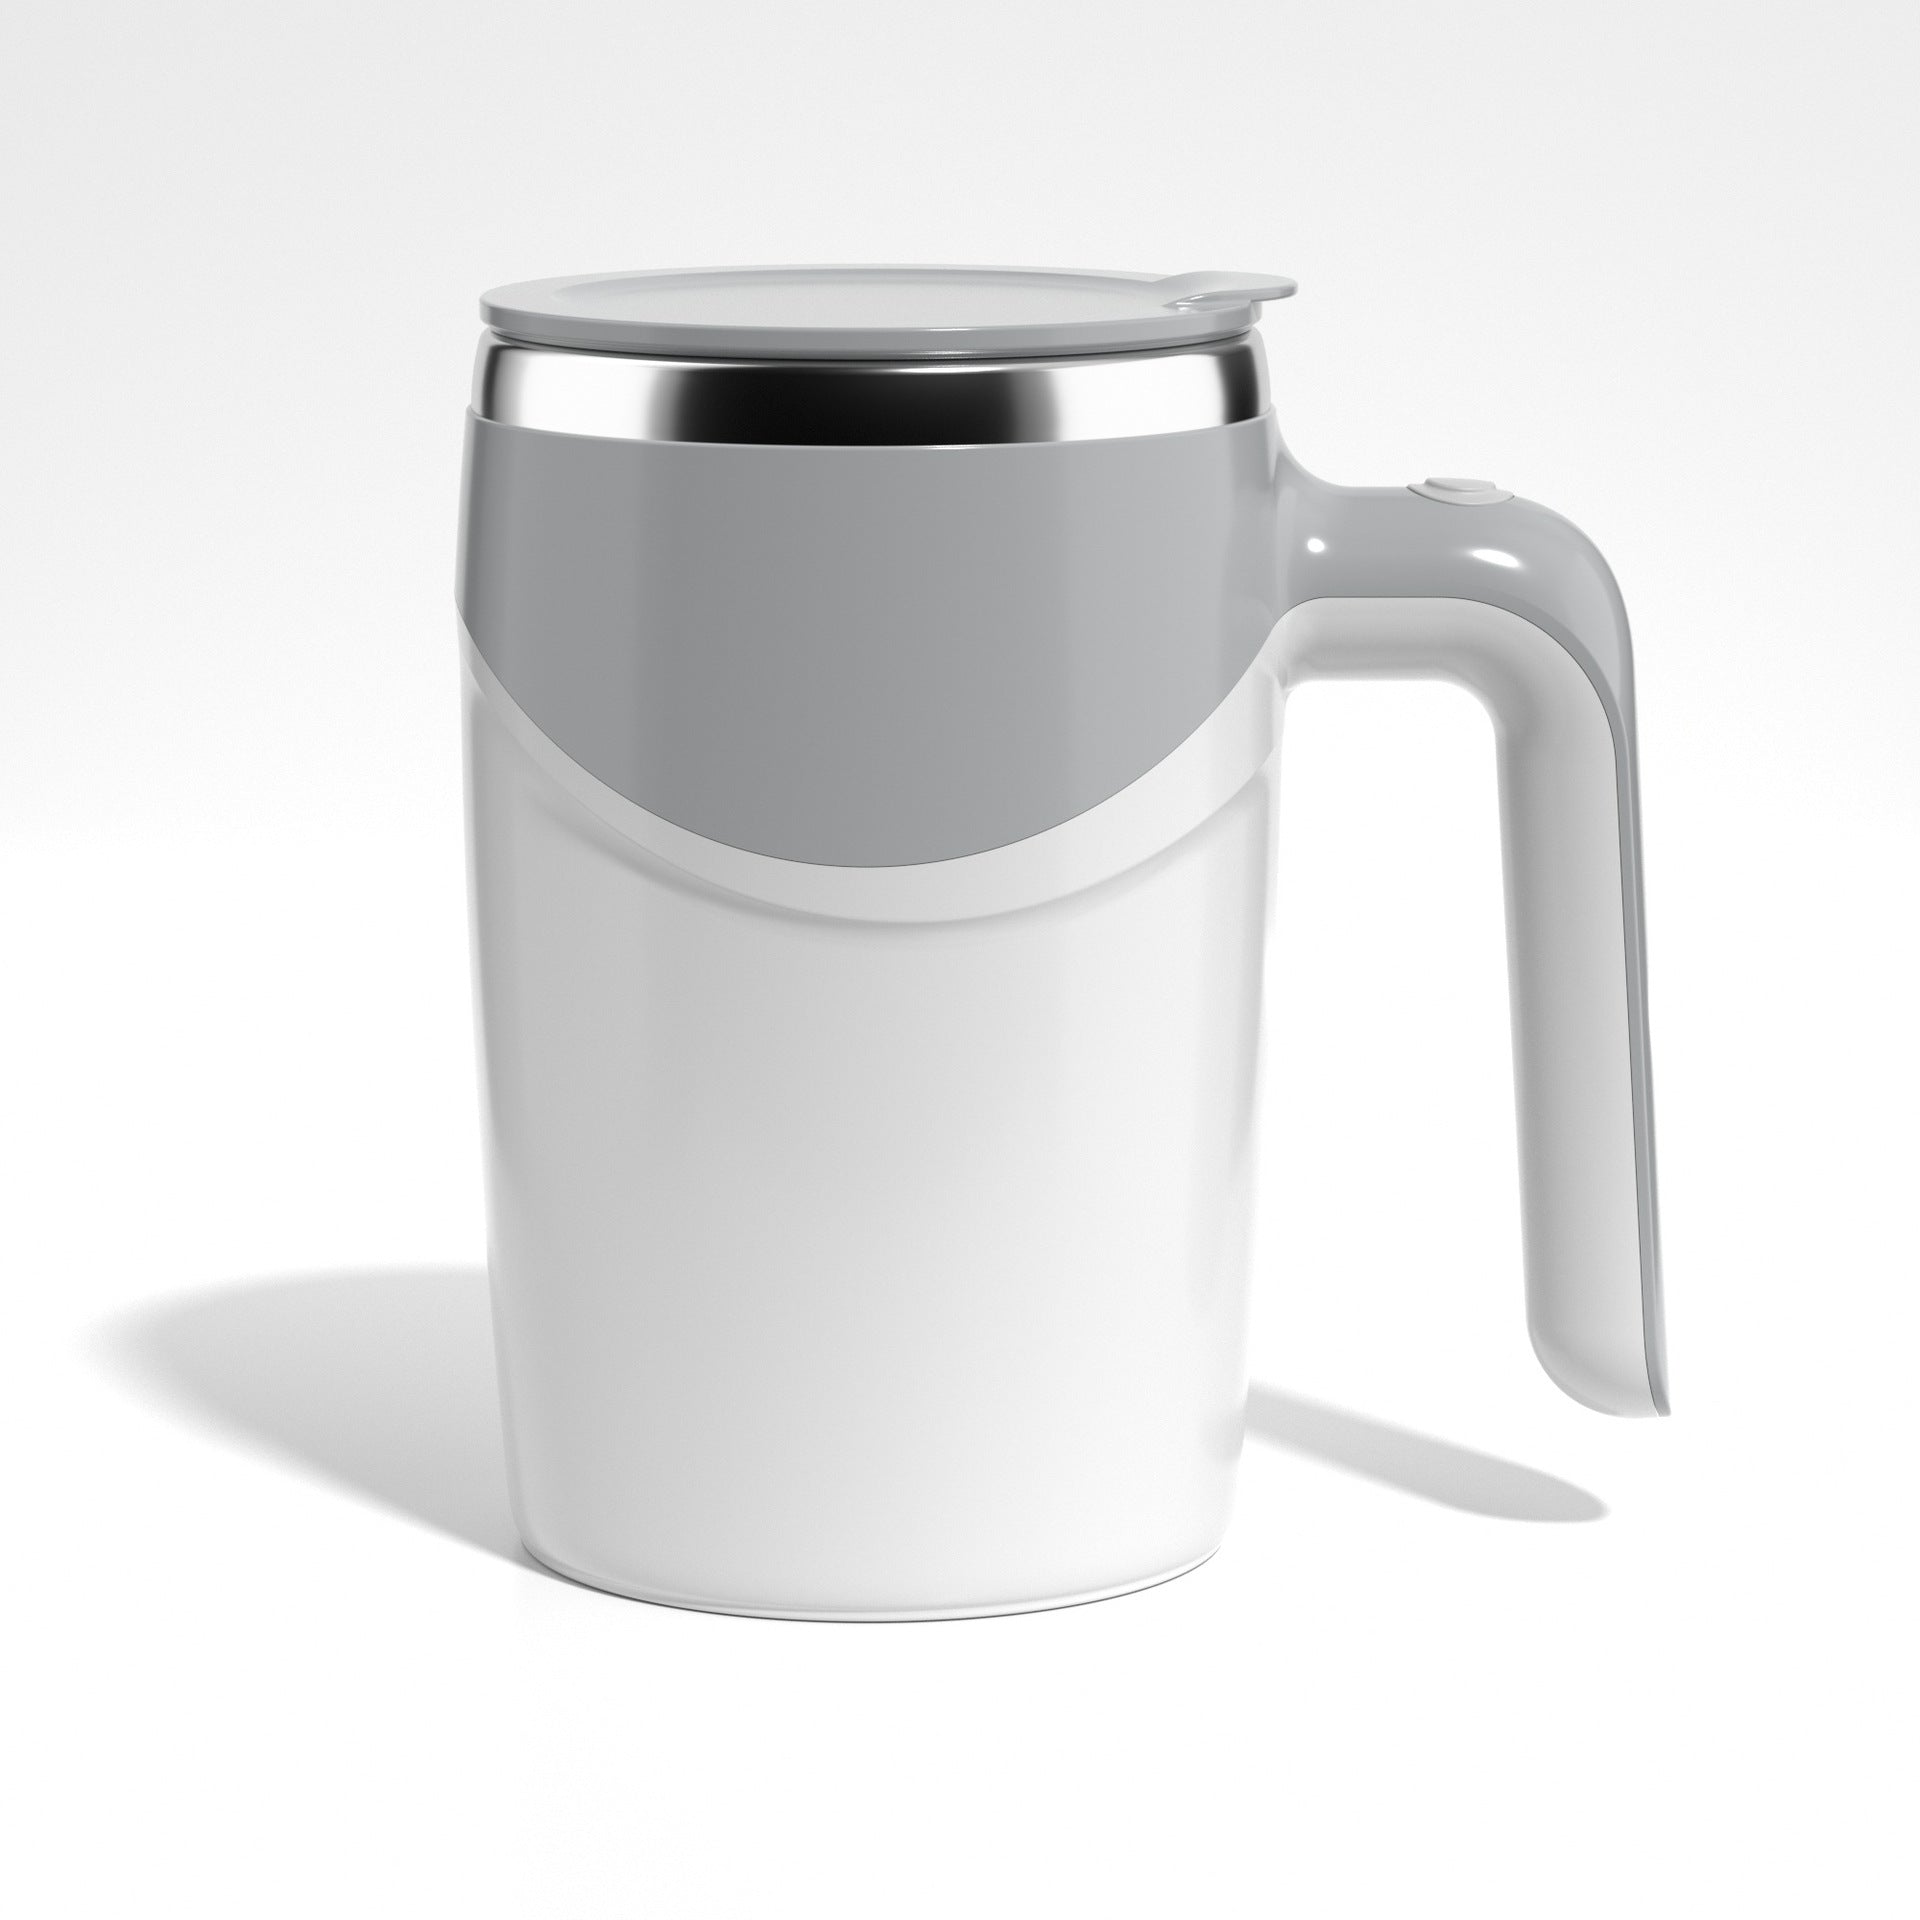 Rechargeable Automatic Stirring Cup - High-Value Electric Coffee Cup